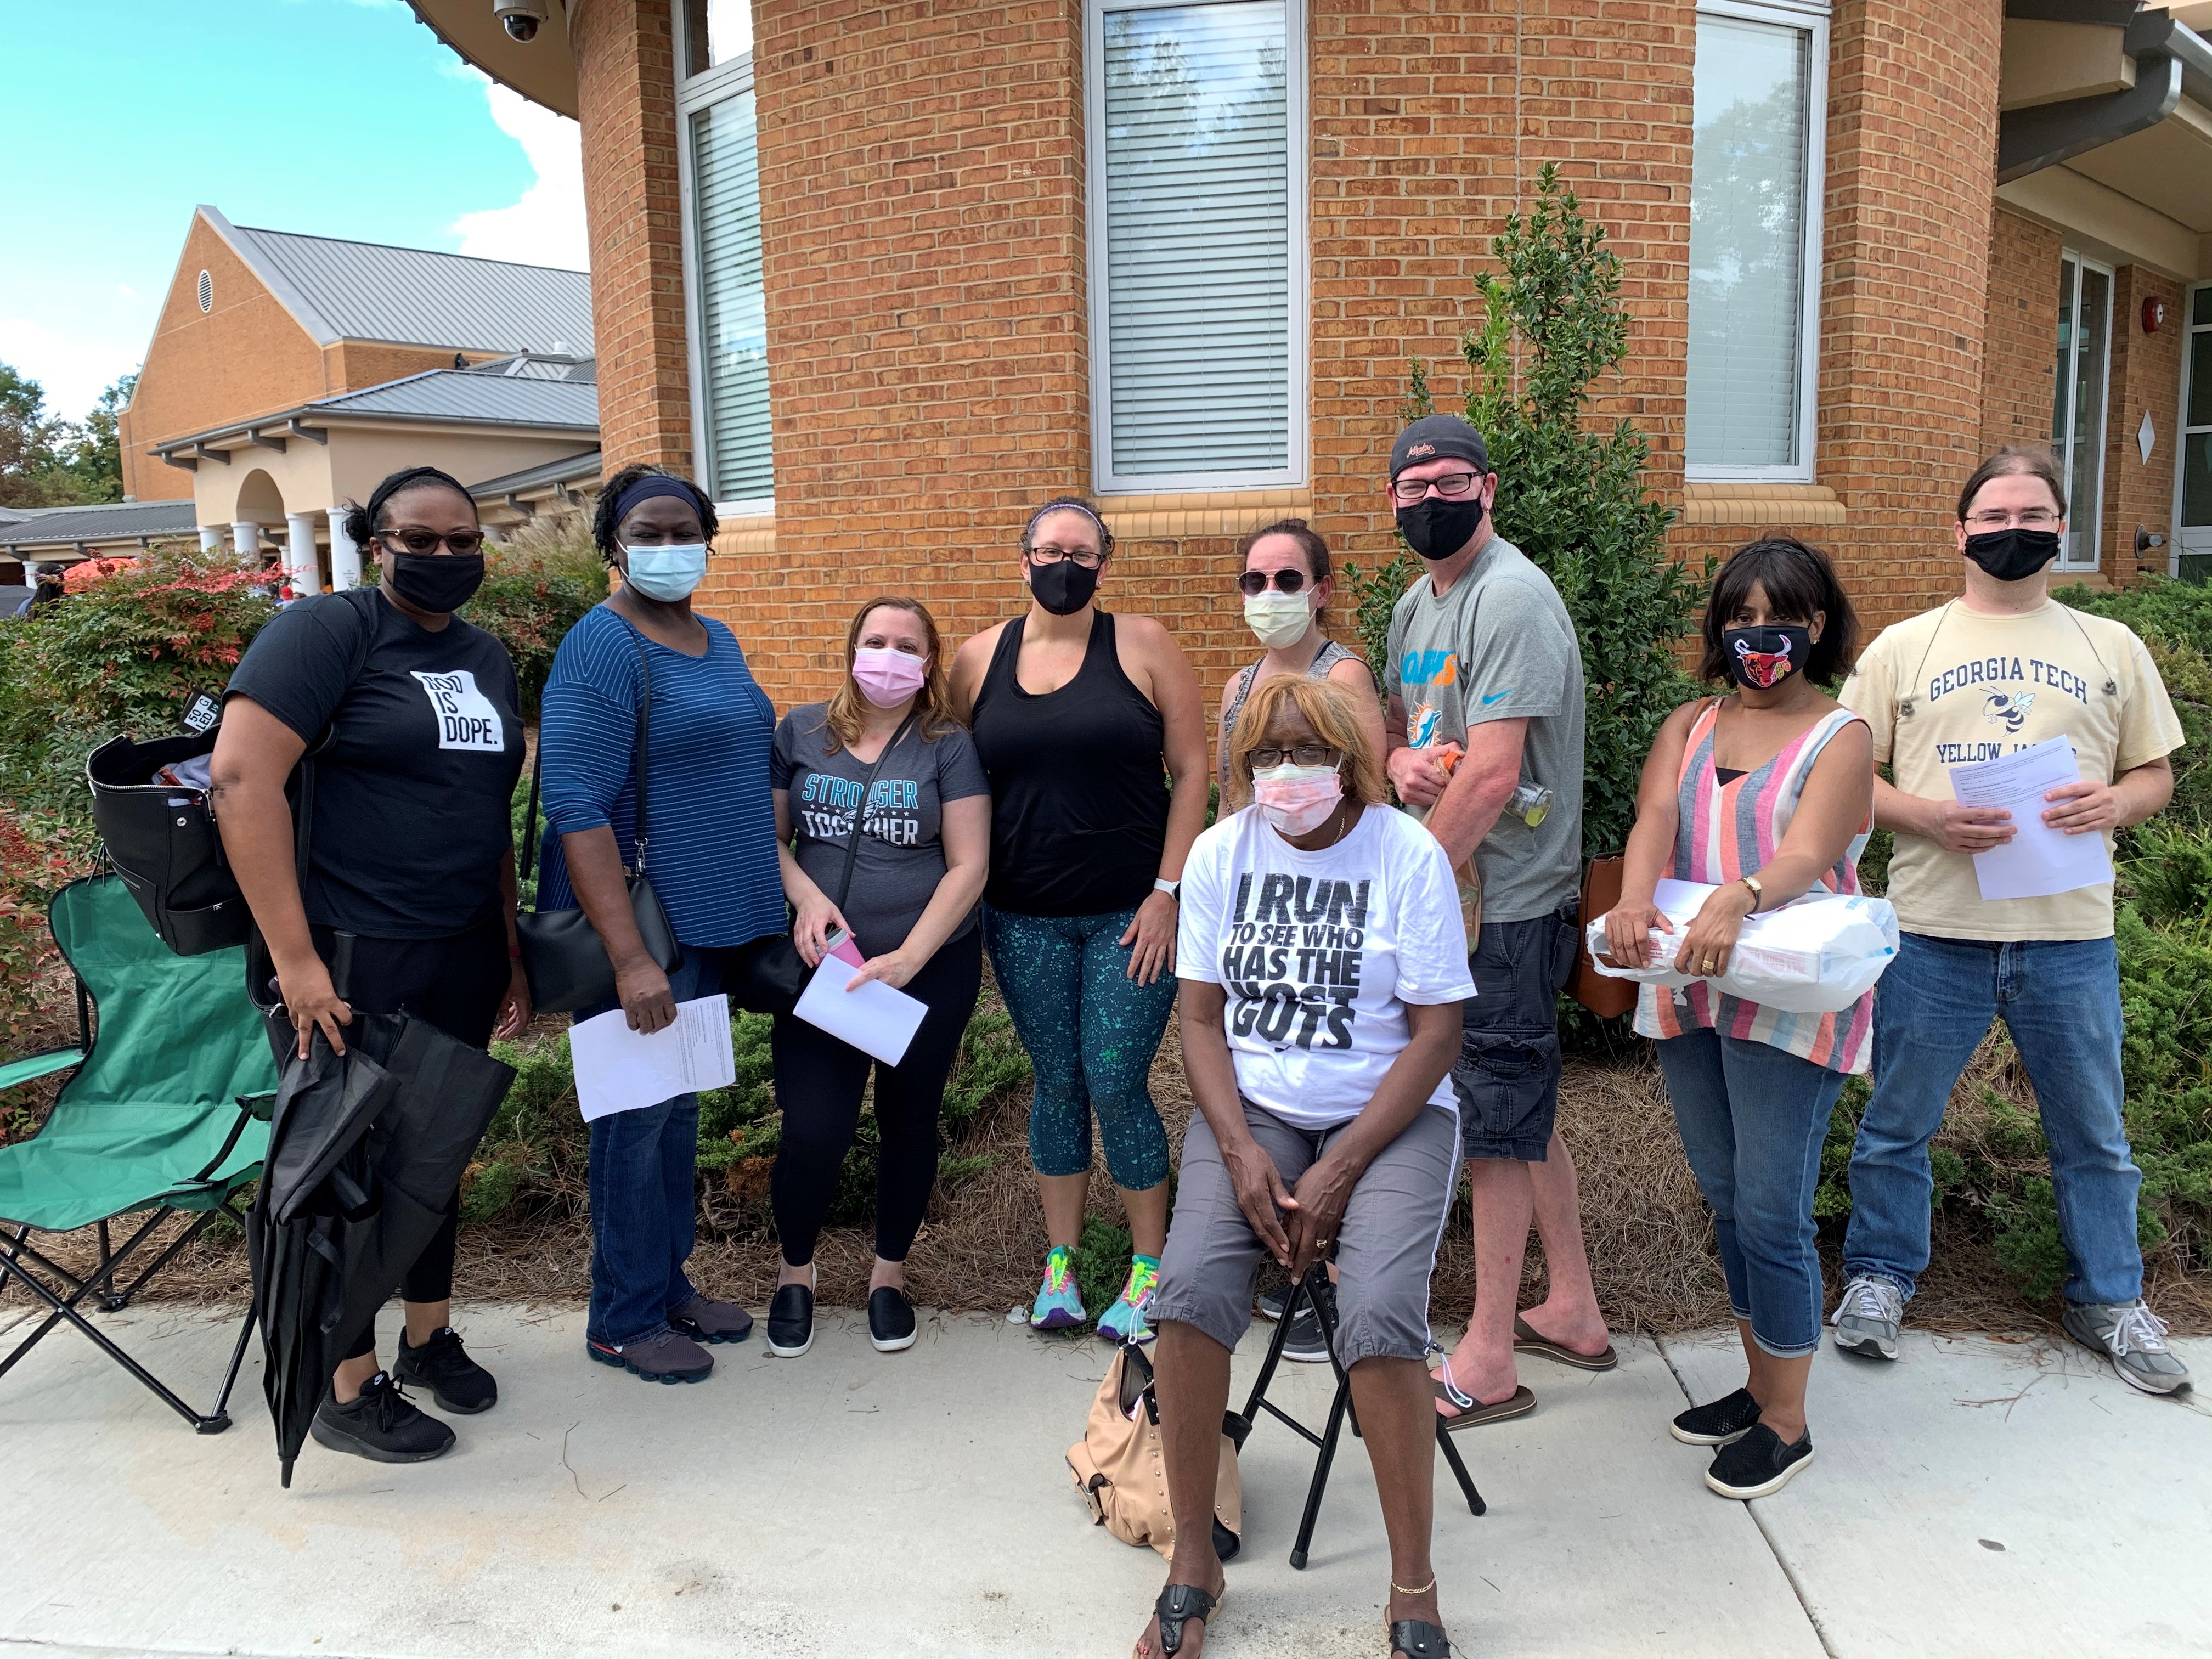 Group of people in masks waiting in line to vote.